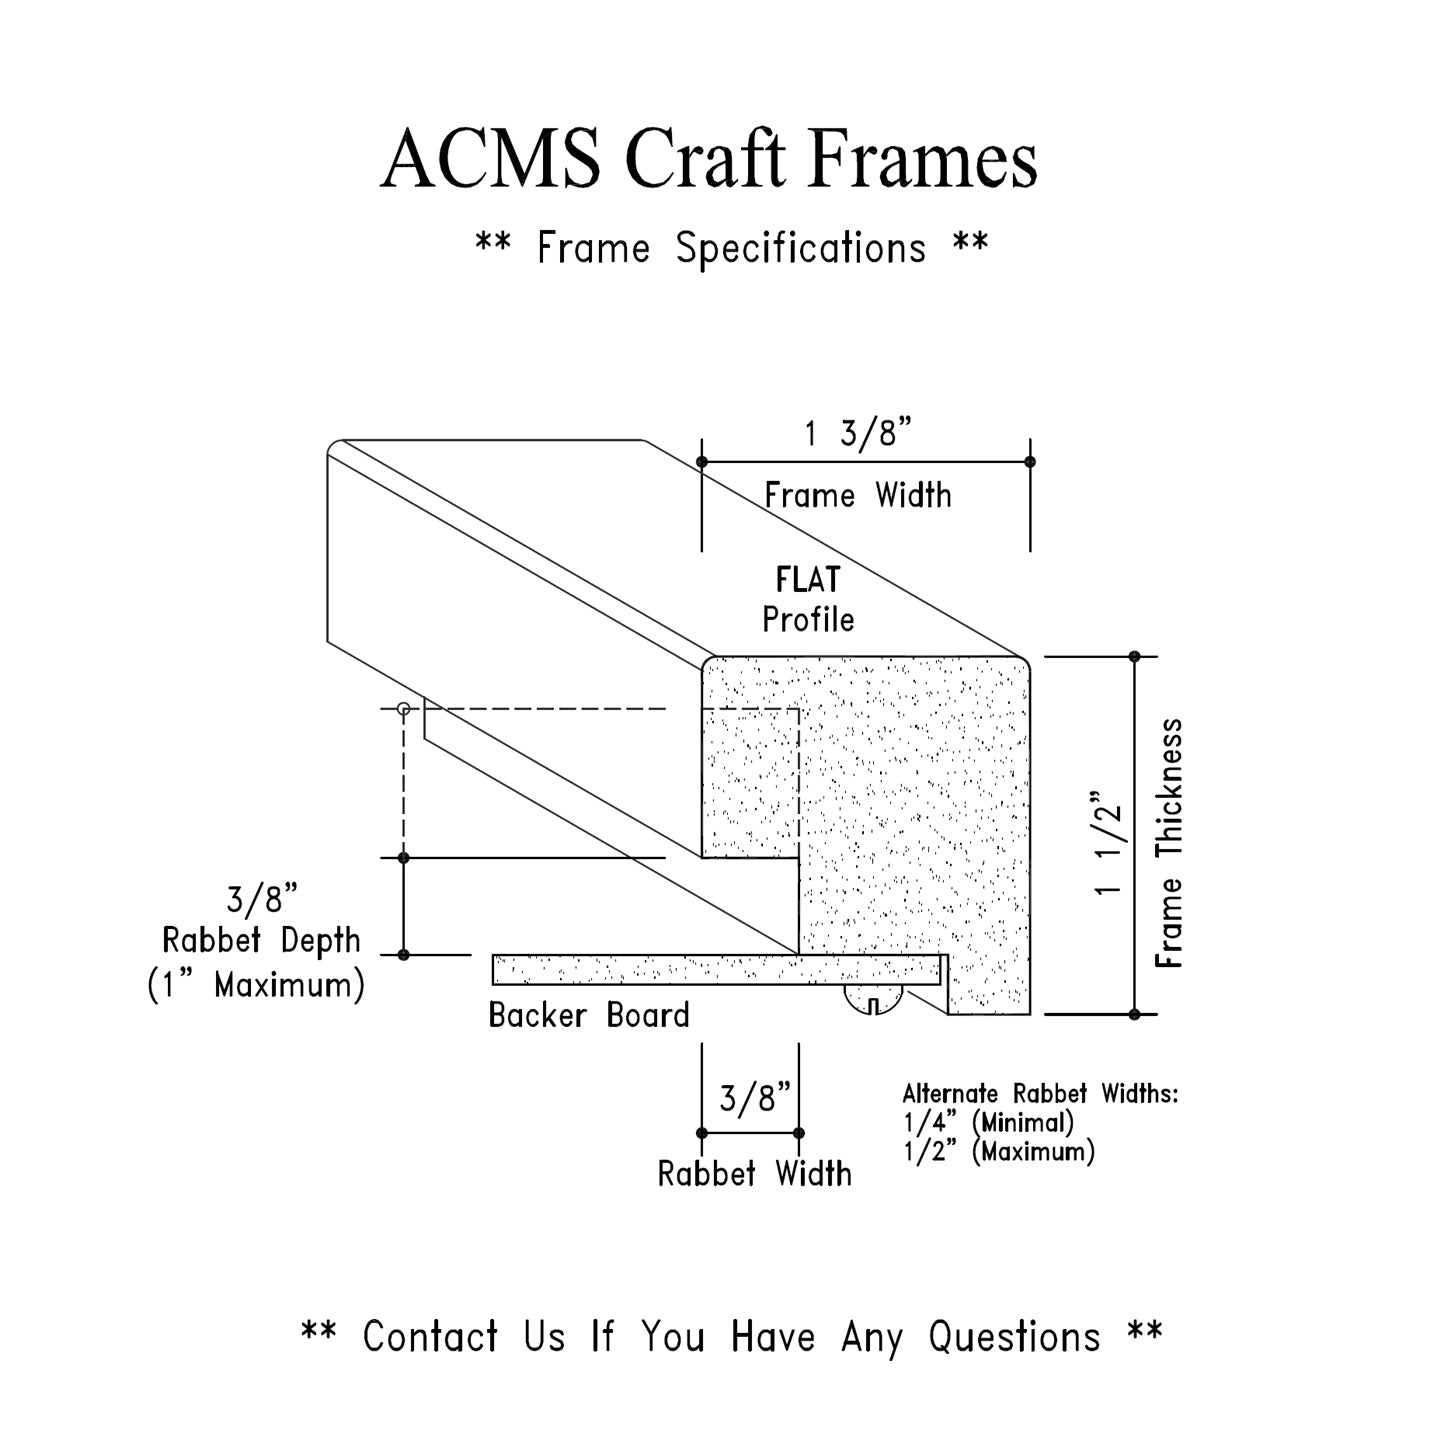 Oval Craft Frame - 1 1/2" Thick - 1 3/8" Flat Profile